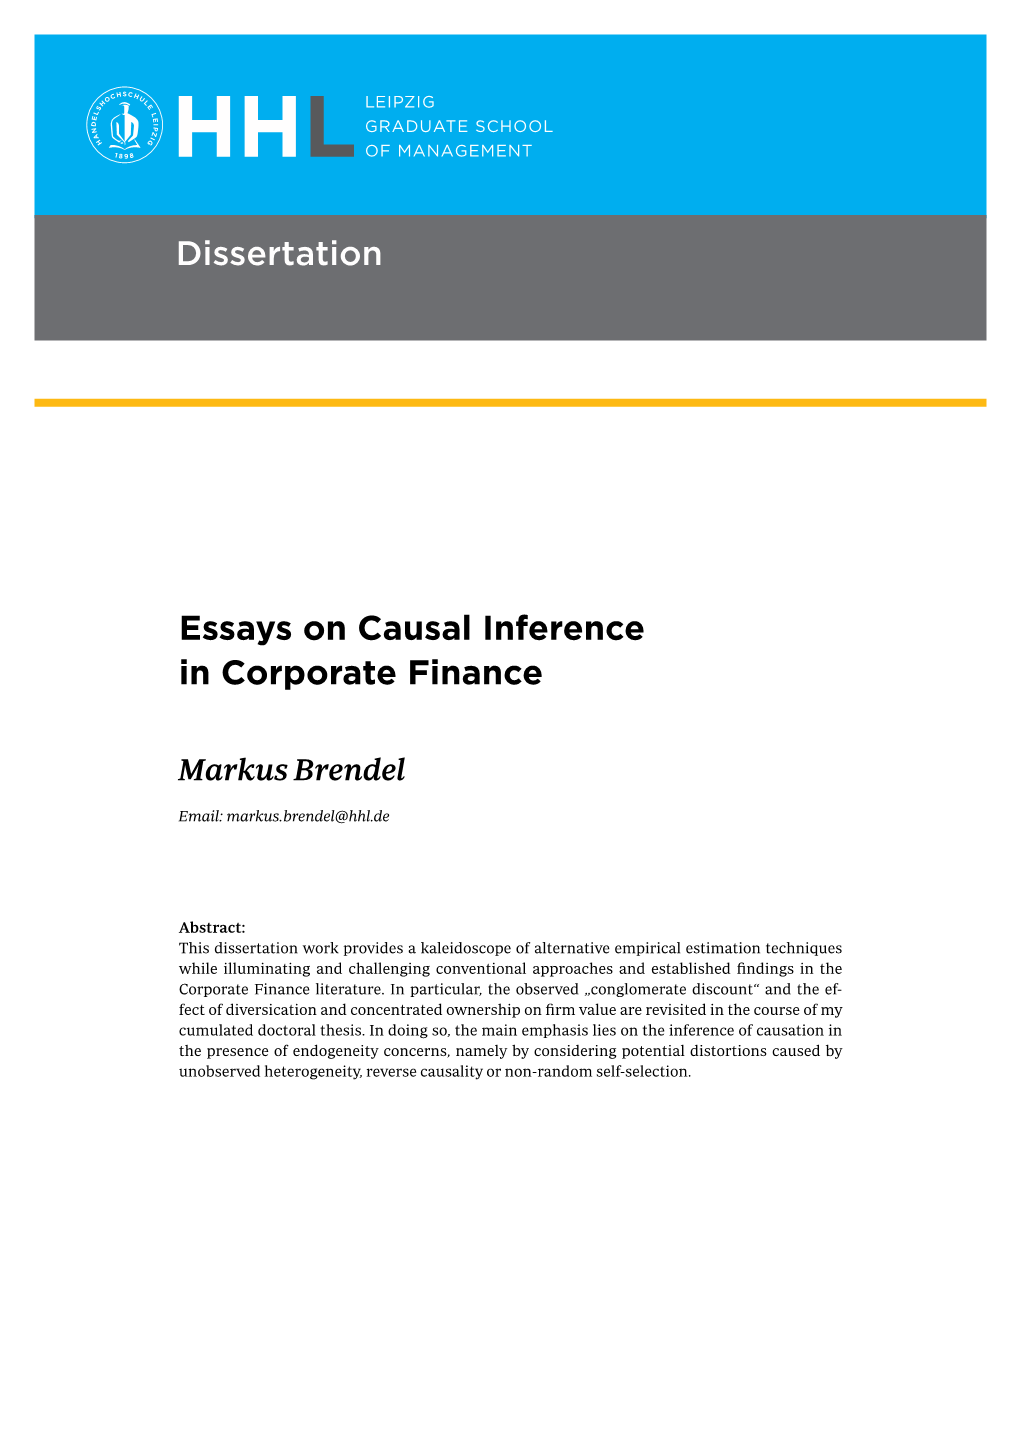 Essays on Causal Inference in Corporate Finance Dissertation